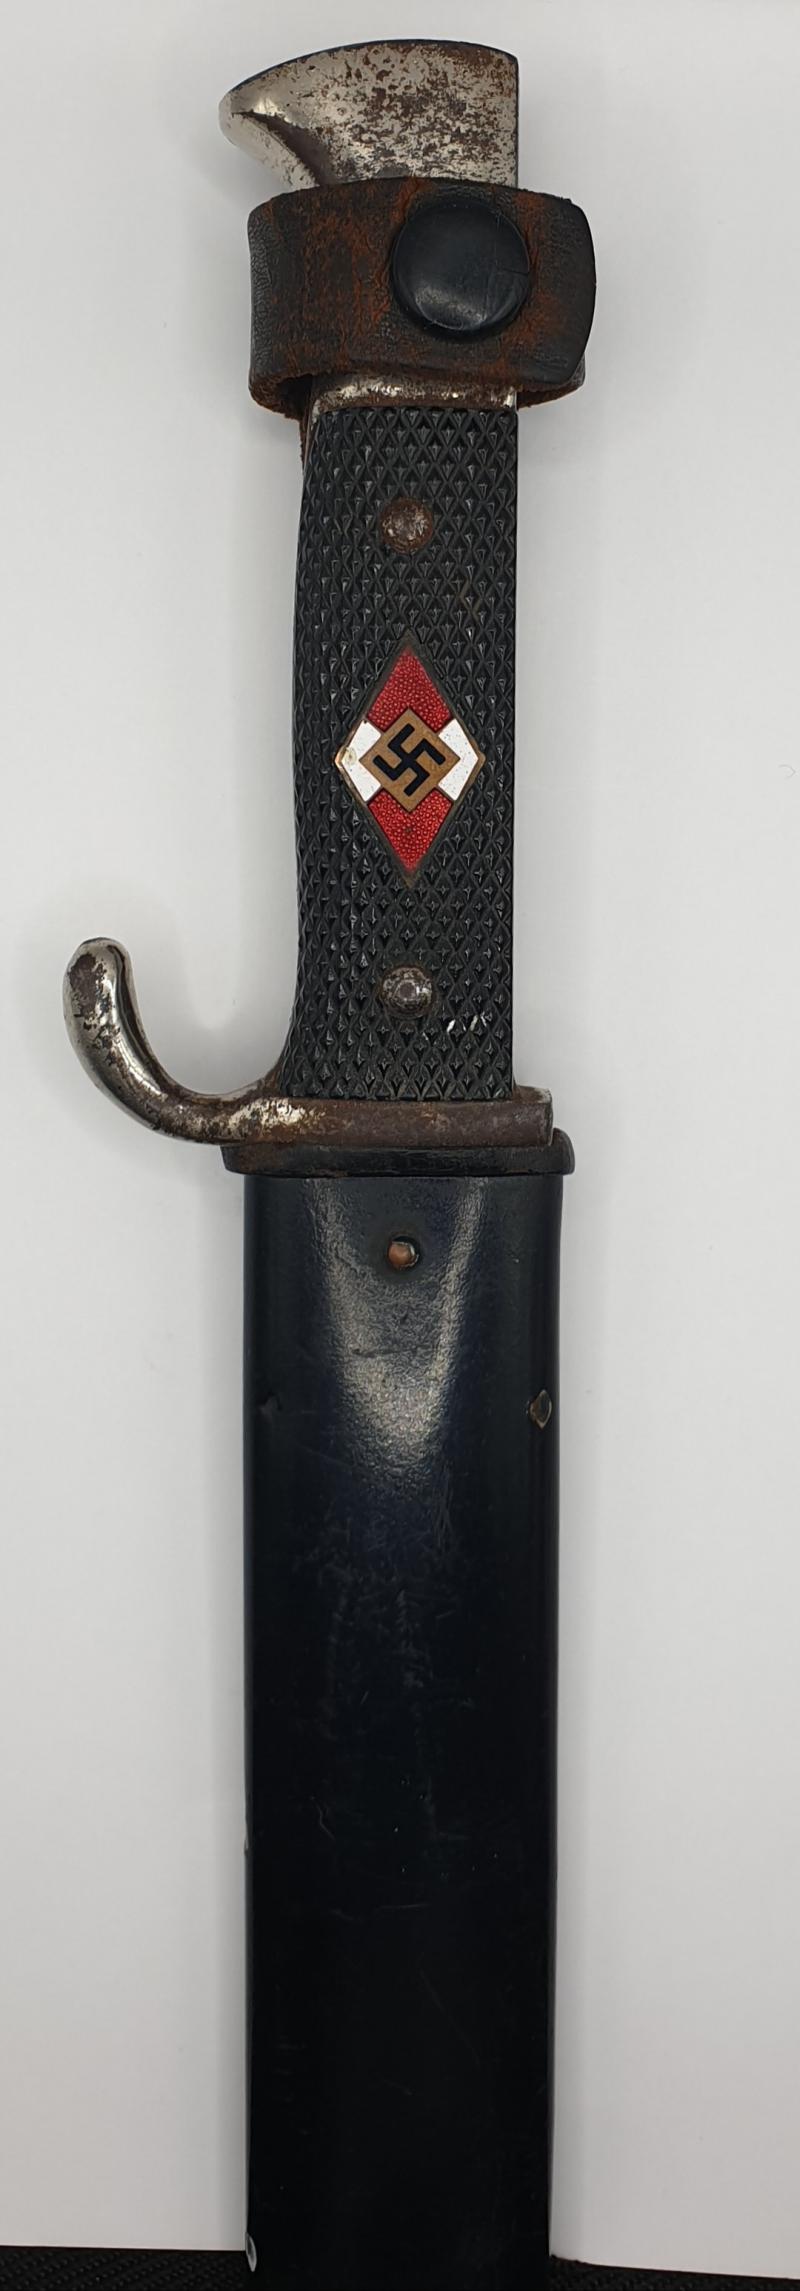 Transitional Hitler Youth Knife with Motto by Carl Eickhorn dated 1937.